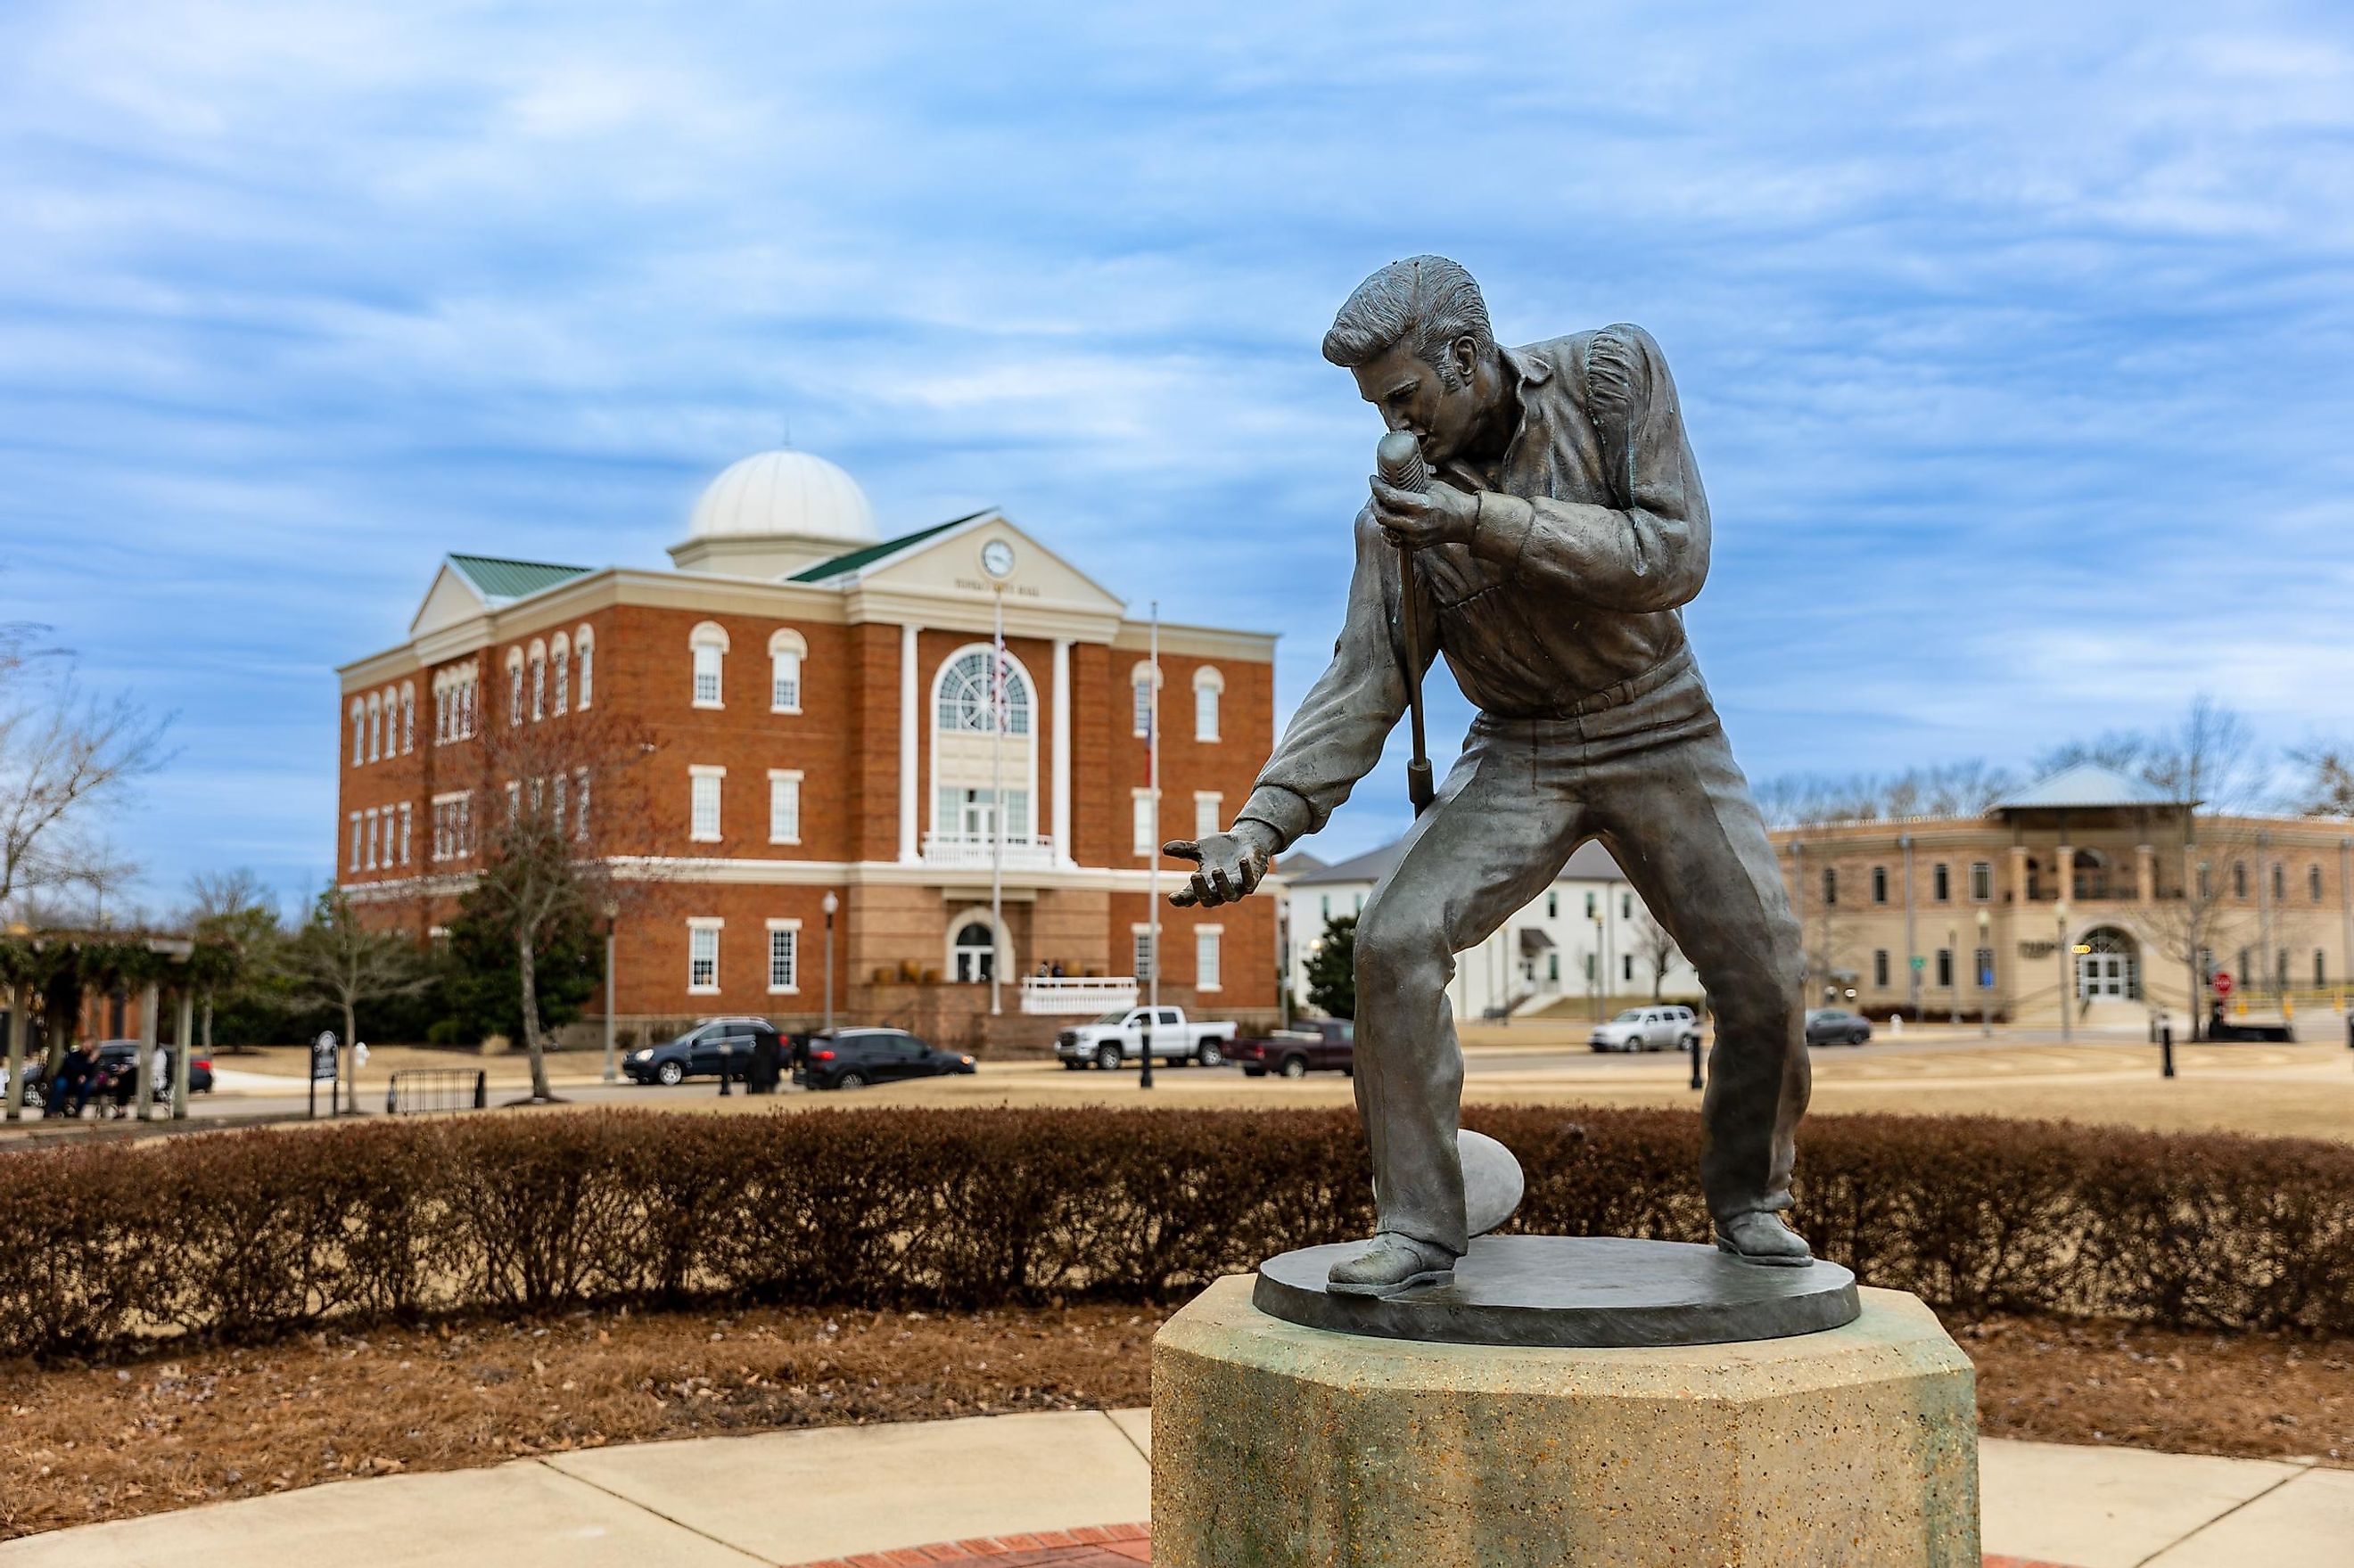 Elvis Presley Statue in Tupelo, with City Hall in the background.